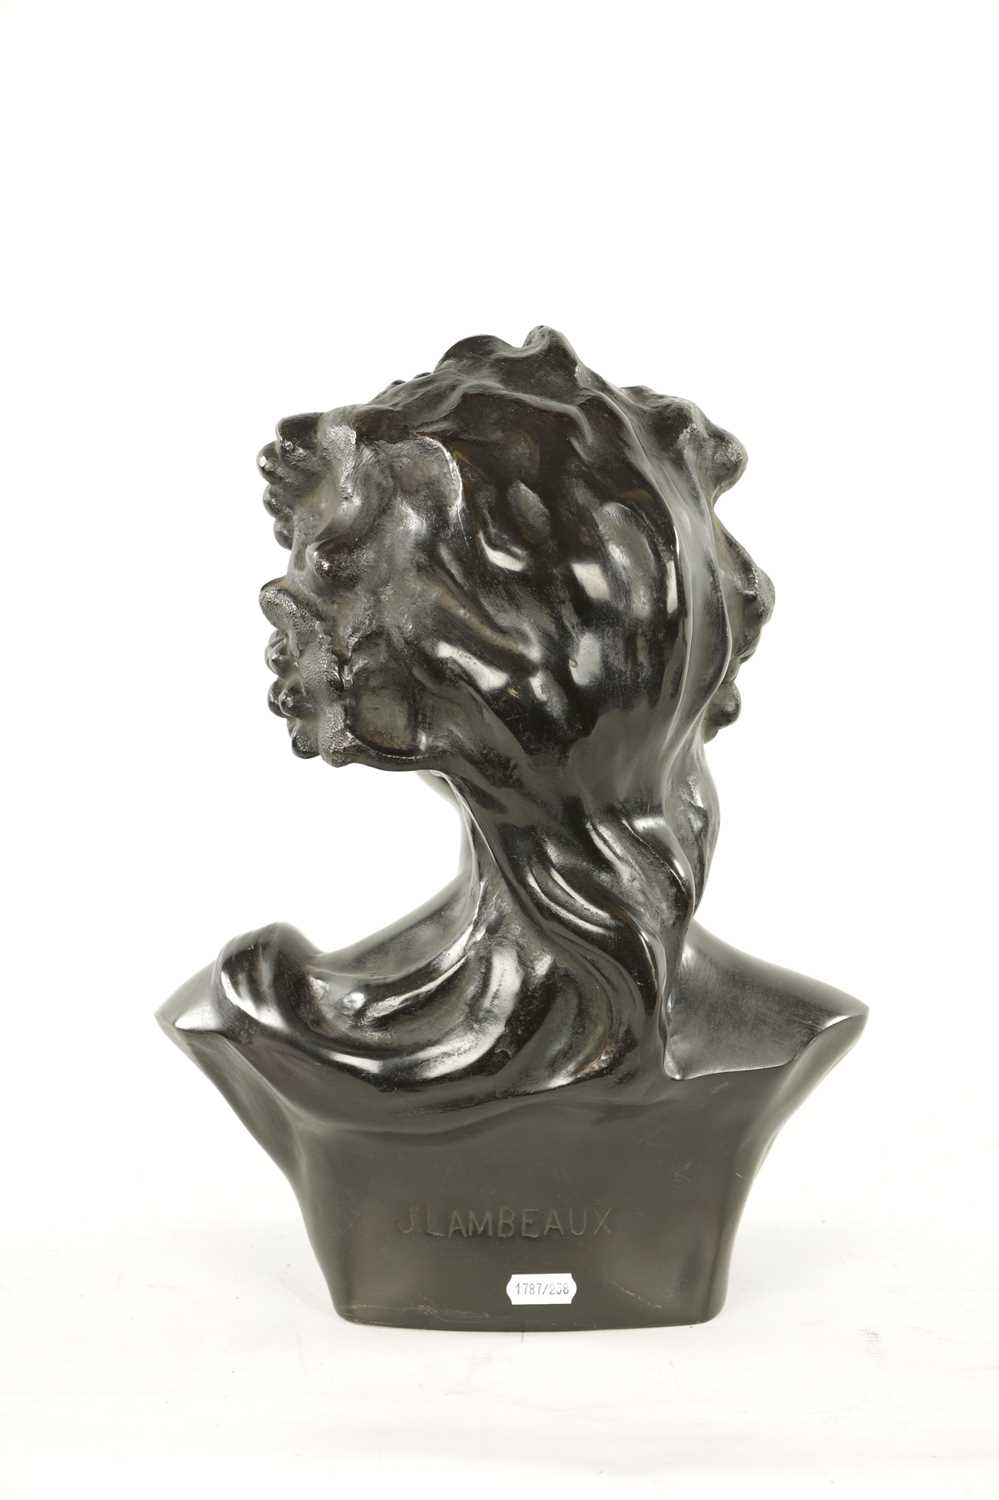 J. LAMBEAUX (1852 – 1908) AN EARLY 20TH CENTURY BRONZE BUST OF A YOUNG LADY - Image 7 of 8